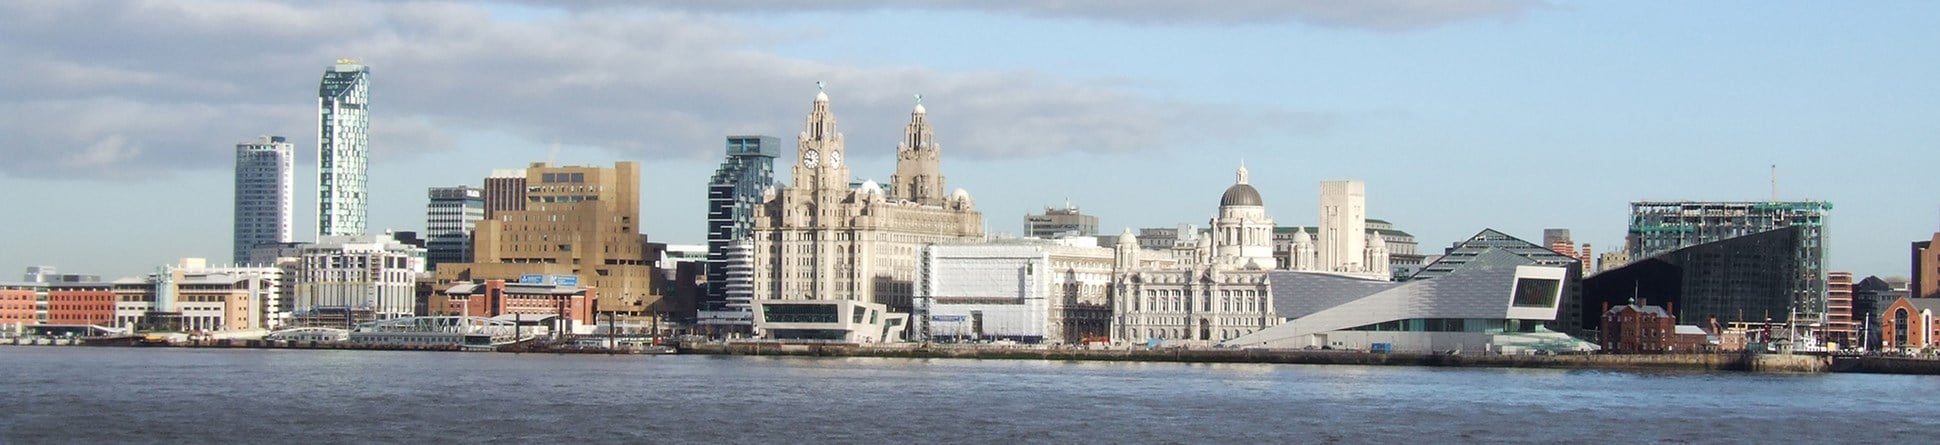 Landscape view of Liverpool across the Mersey.